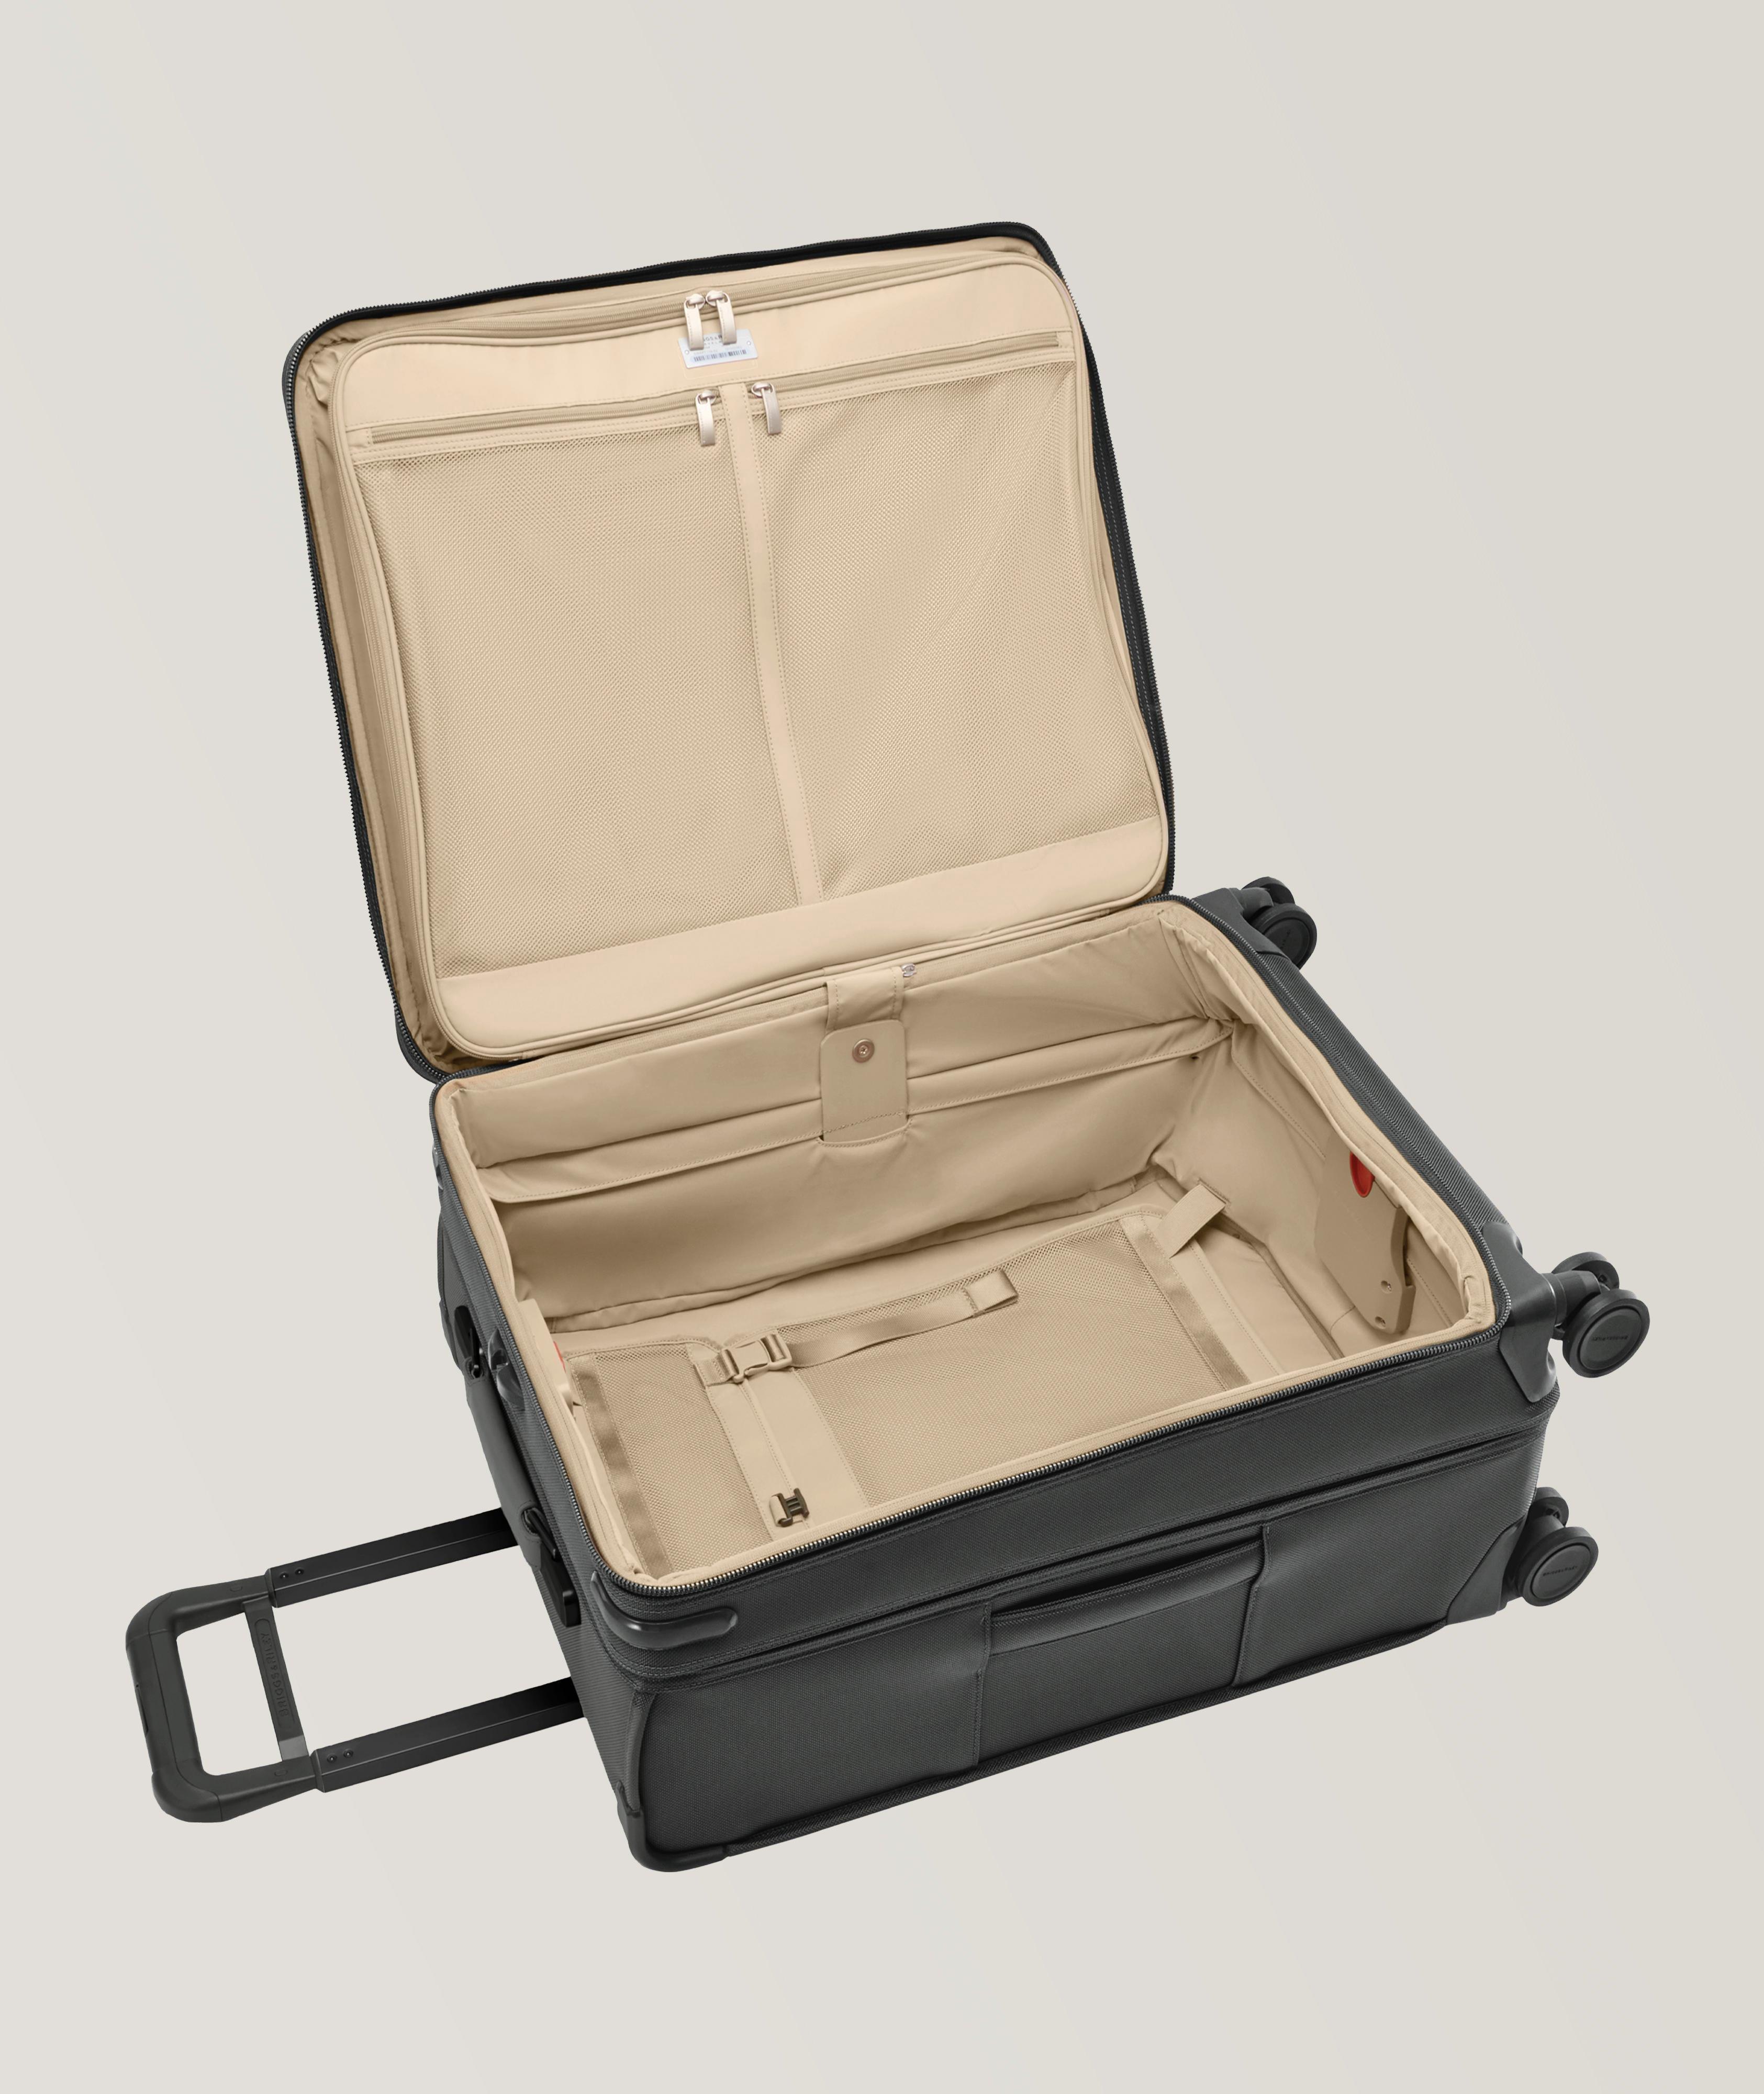 Valise moyenne extensible sur roues image 2